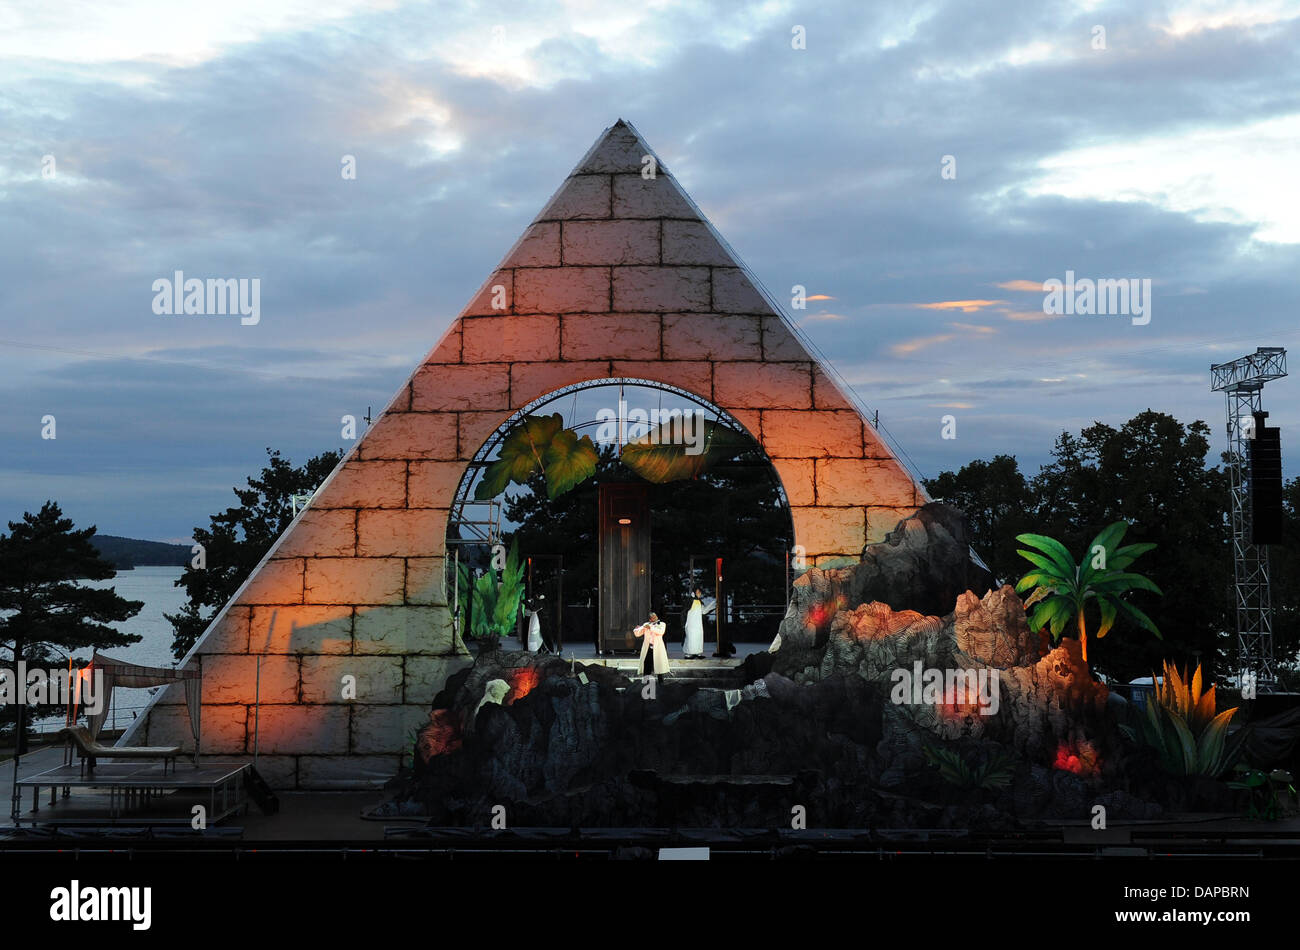 The pyramid characterises the stage setting of the opera 'Magic Flute' by Wolfgang Amadeus Mozart during the sea festival Berlin at the sea stage of the lido Wannsee in Berlin, Germany, 09 August 2011. The opera will be staged from 11 to 28 August 2011. Photo: Jens Kalaene Stock Photo